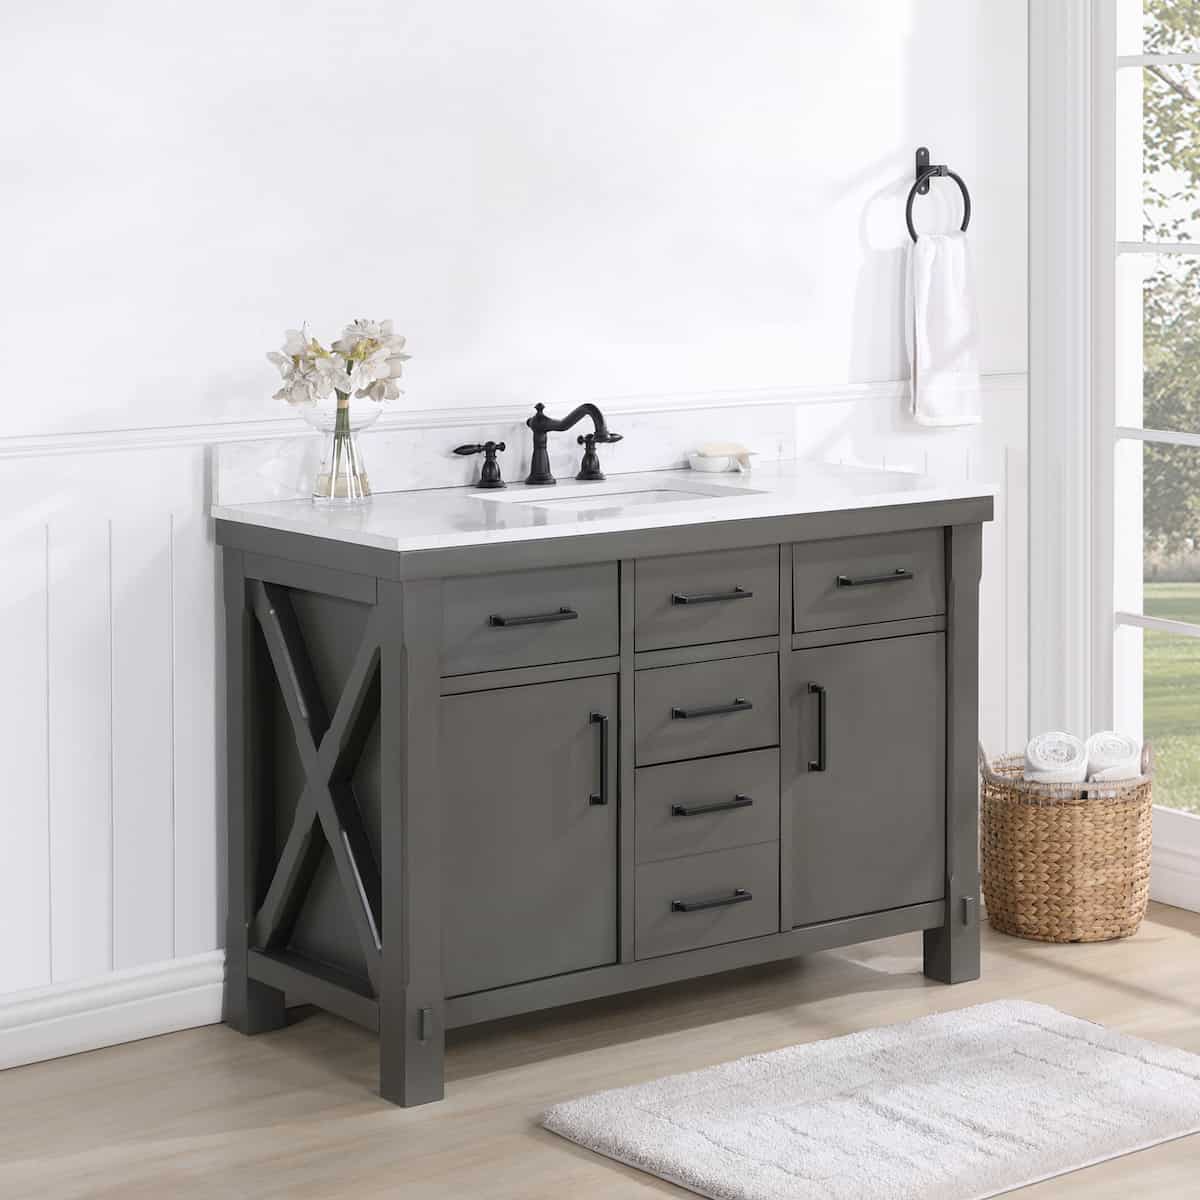 Vinnova Viella 48 Inch Freestanding Single Sink Bath Vanity in Rust Grey Finish with White Composite Countertop Without Mirror Side 701848-RU-WS-NM